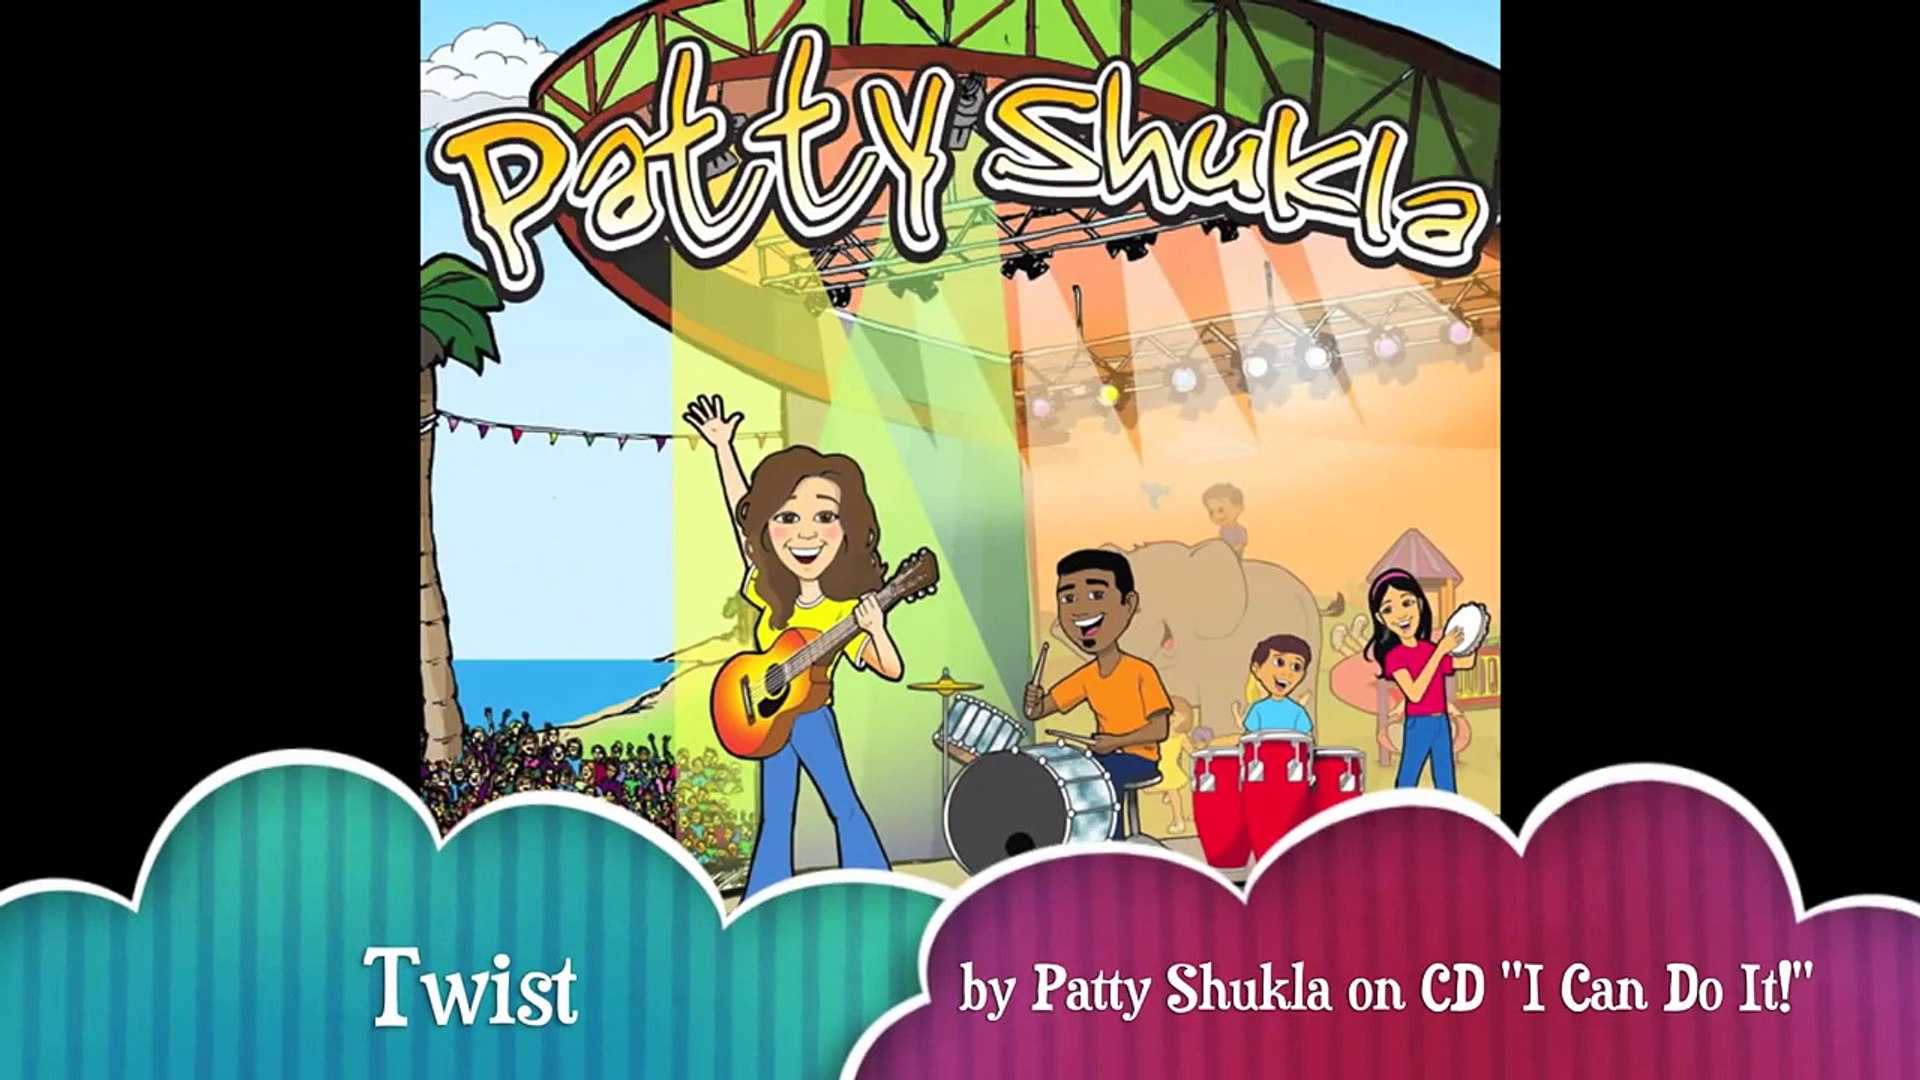 Simon Says Song for Children by Patty Shukla  Simon Says Song for Children  by Patty ShuklaSimon says song for children by Patty Shukla. Buy the DVD  and CD on  or